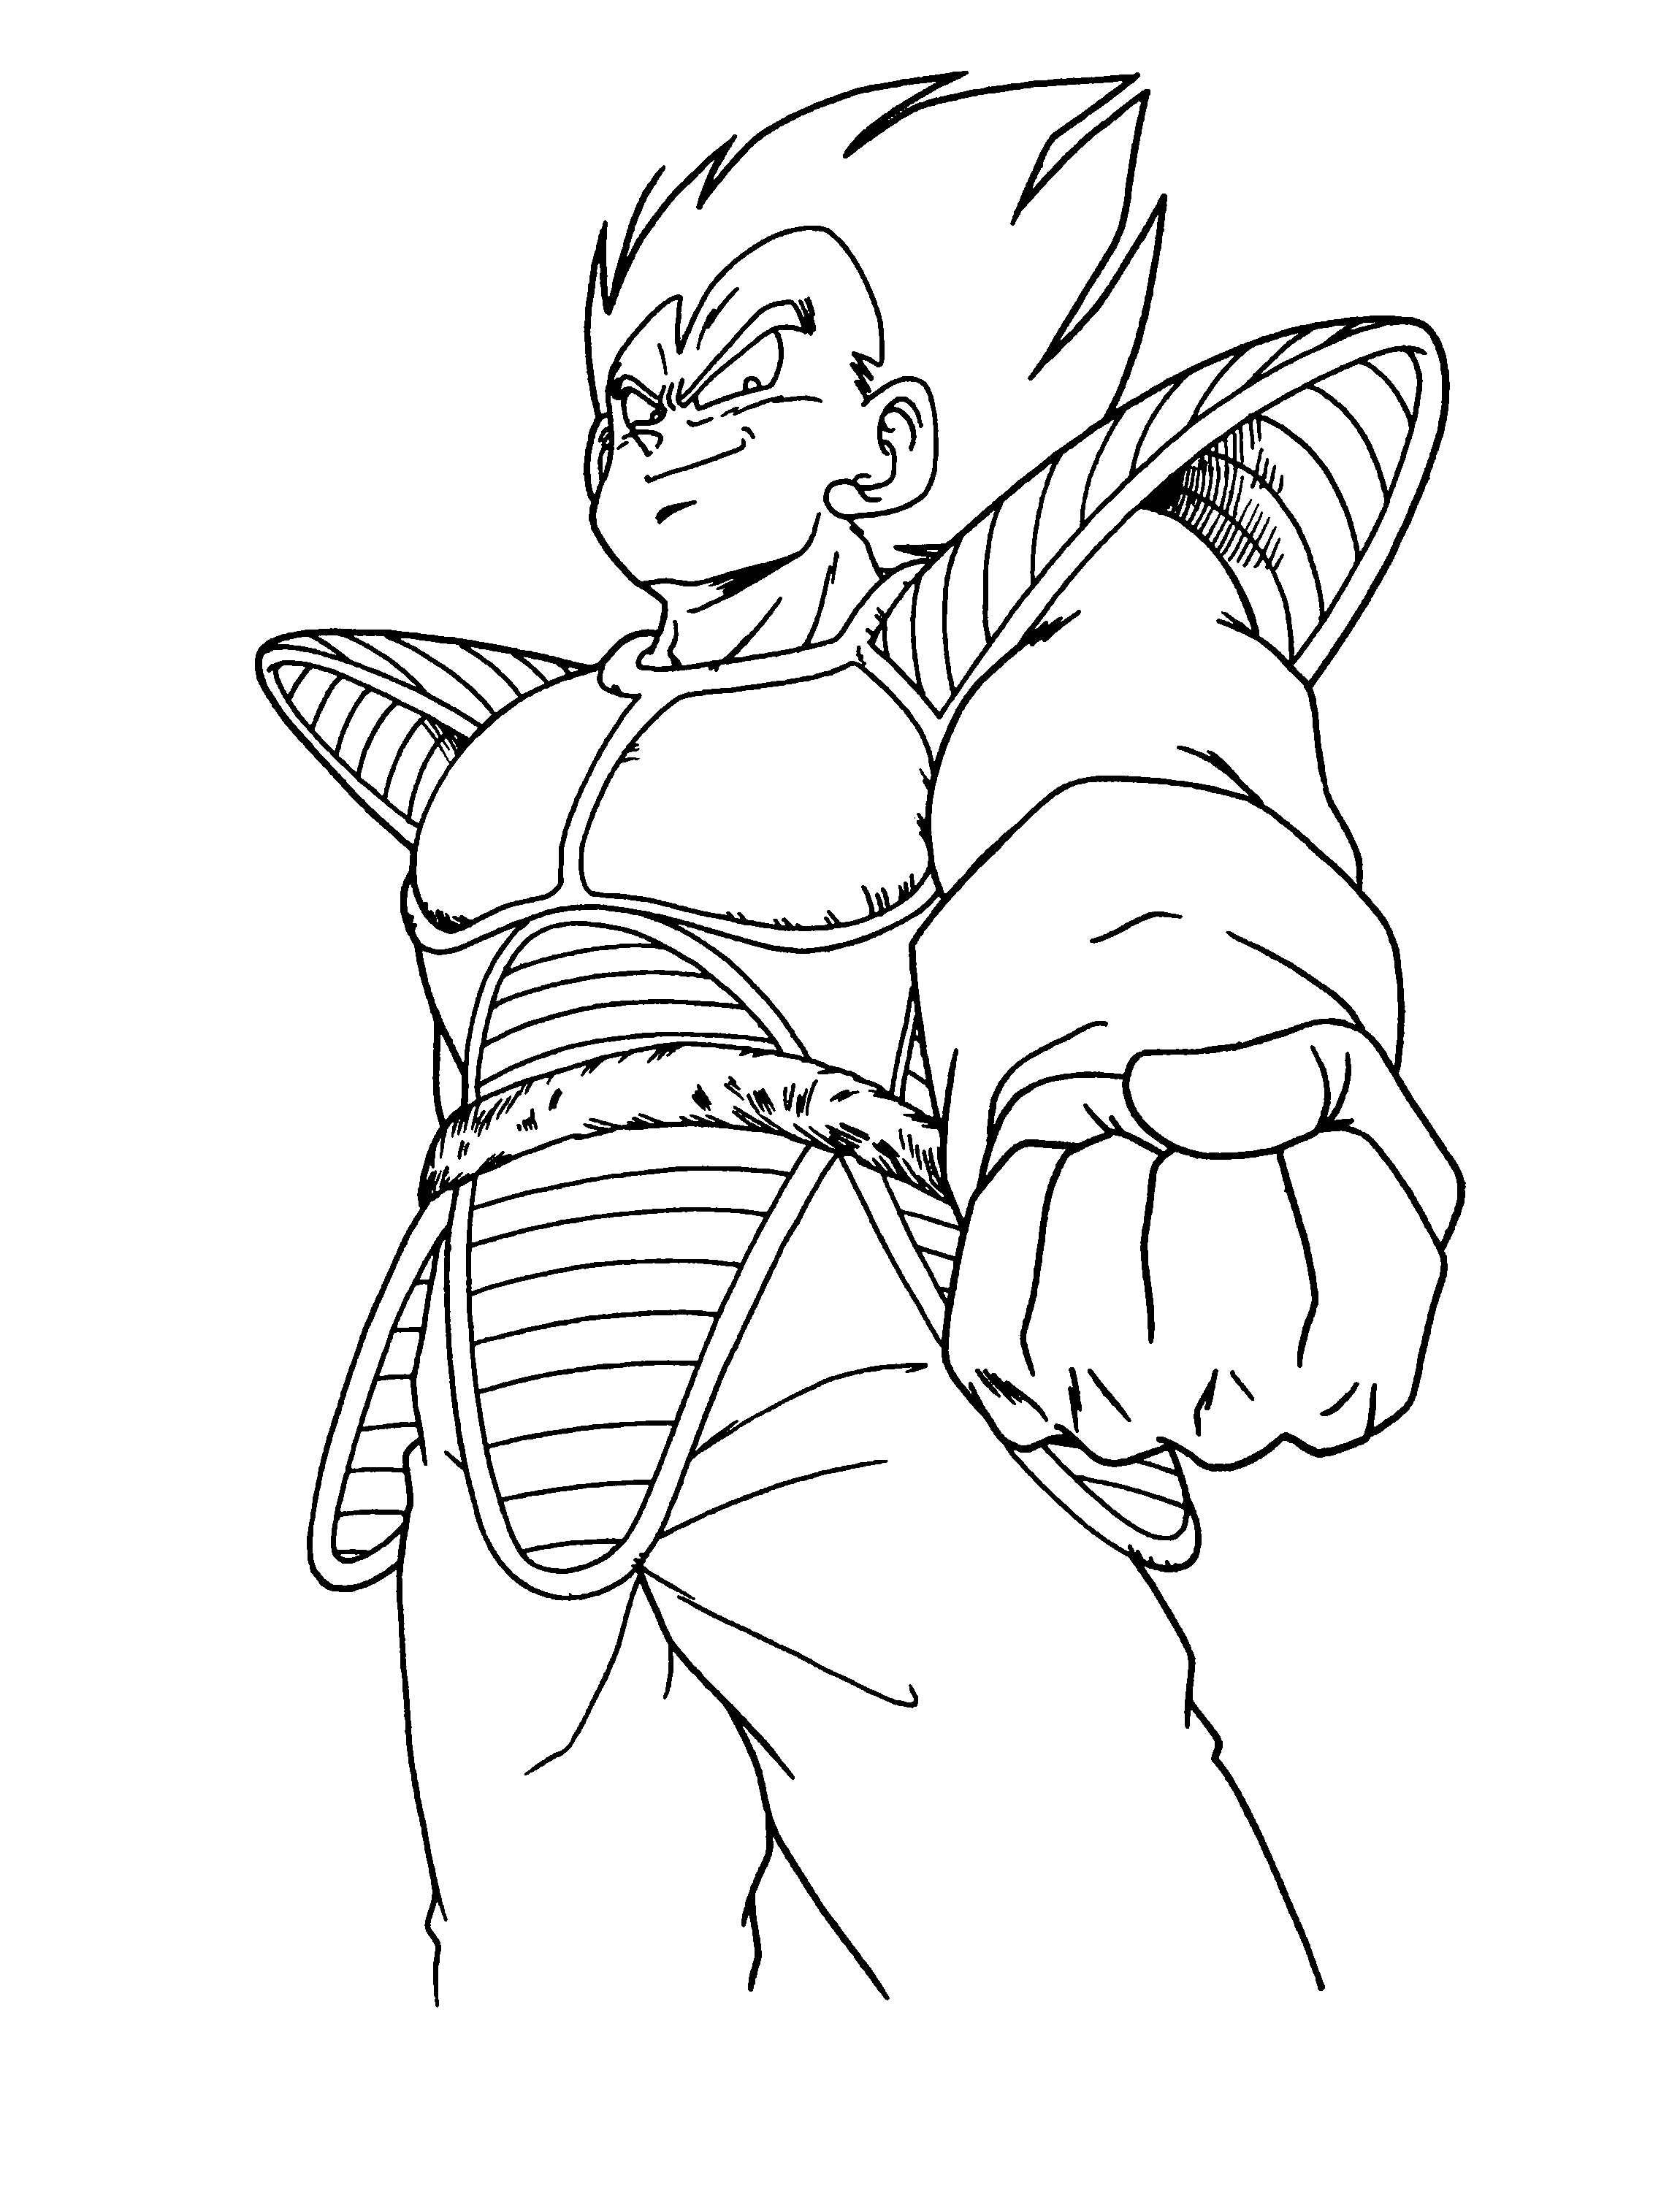 Dragon Ball Z Coloring Pages - Anime Dragon Ball Characters